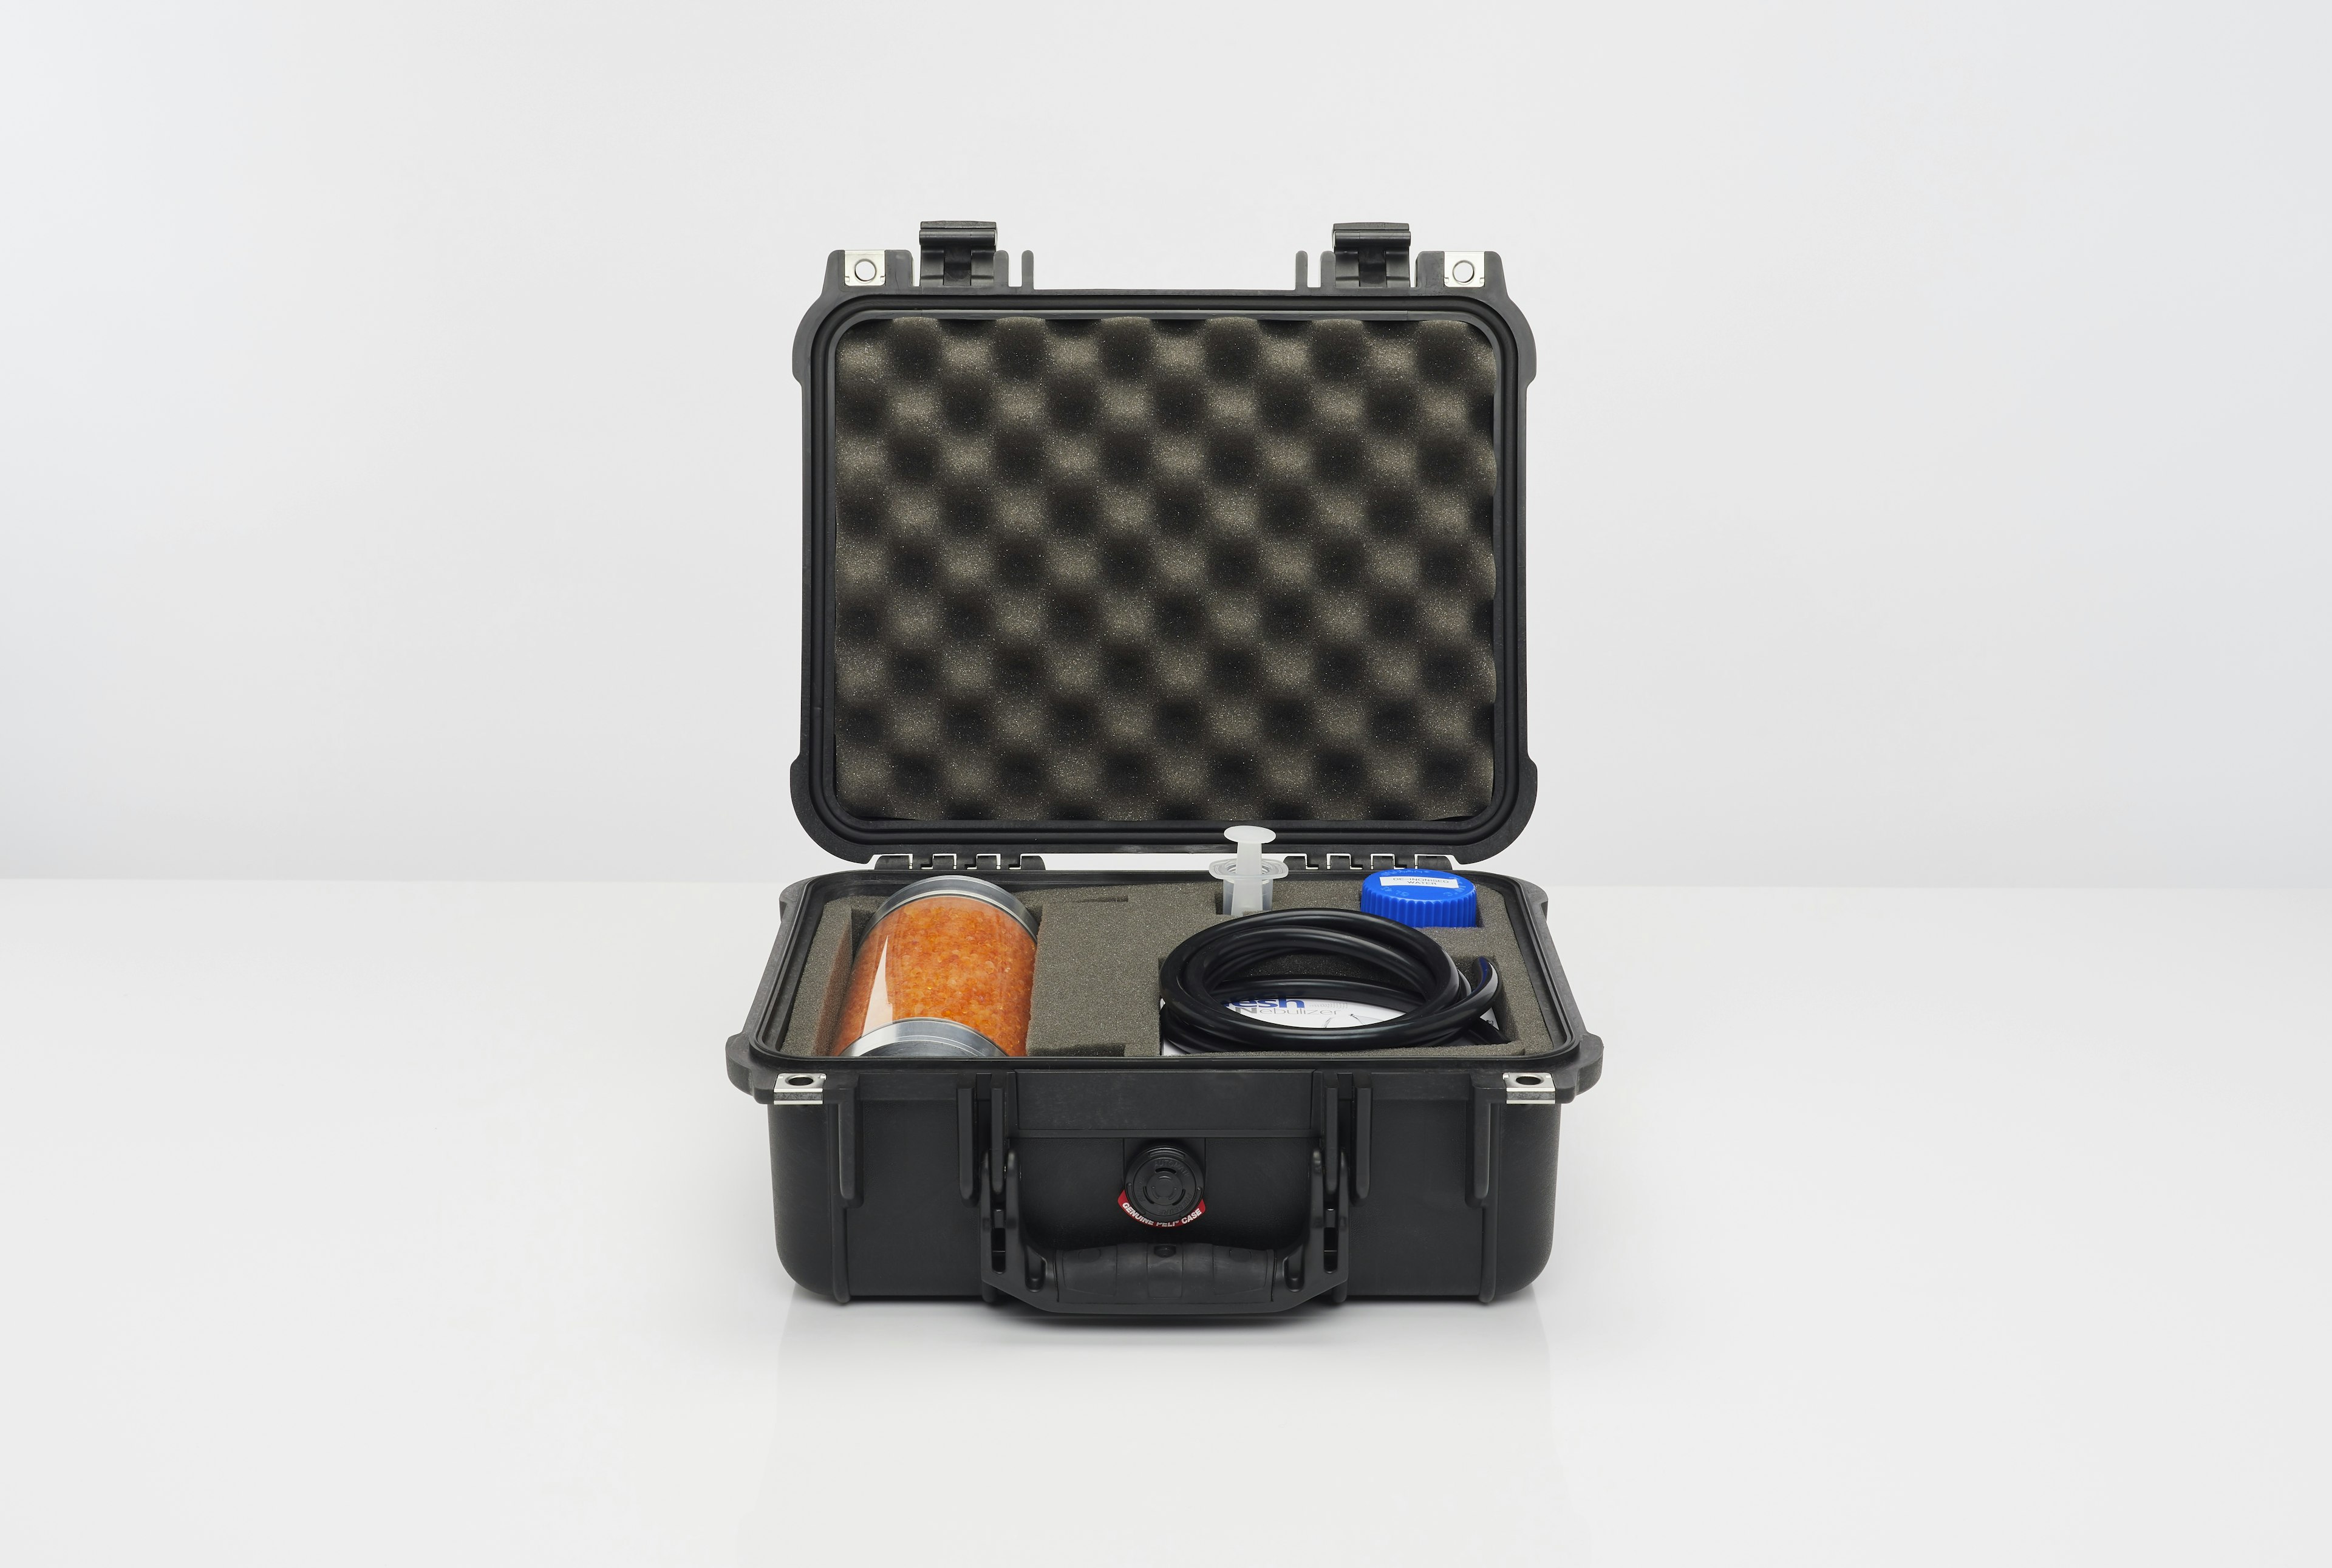 Cambustion particle size check kit in hard case